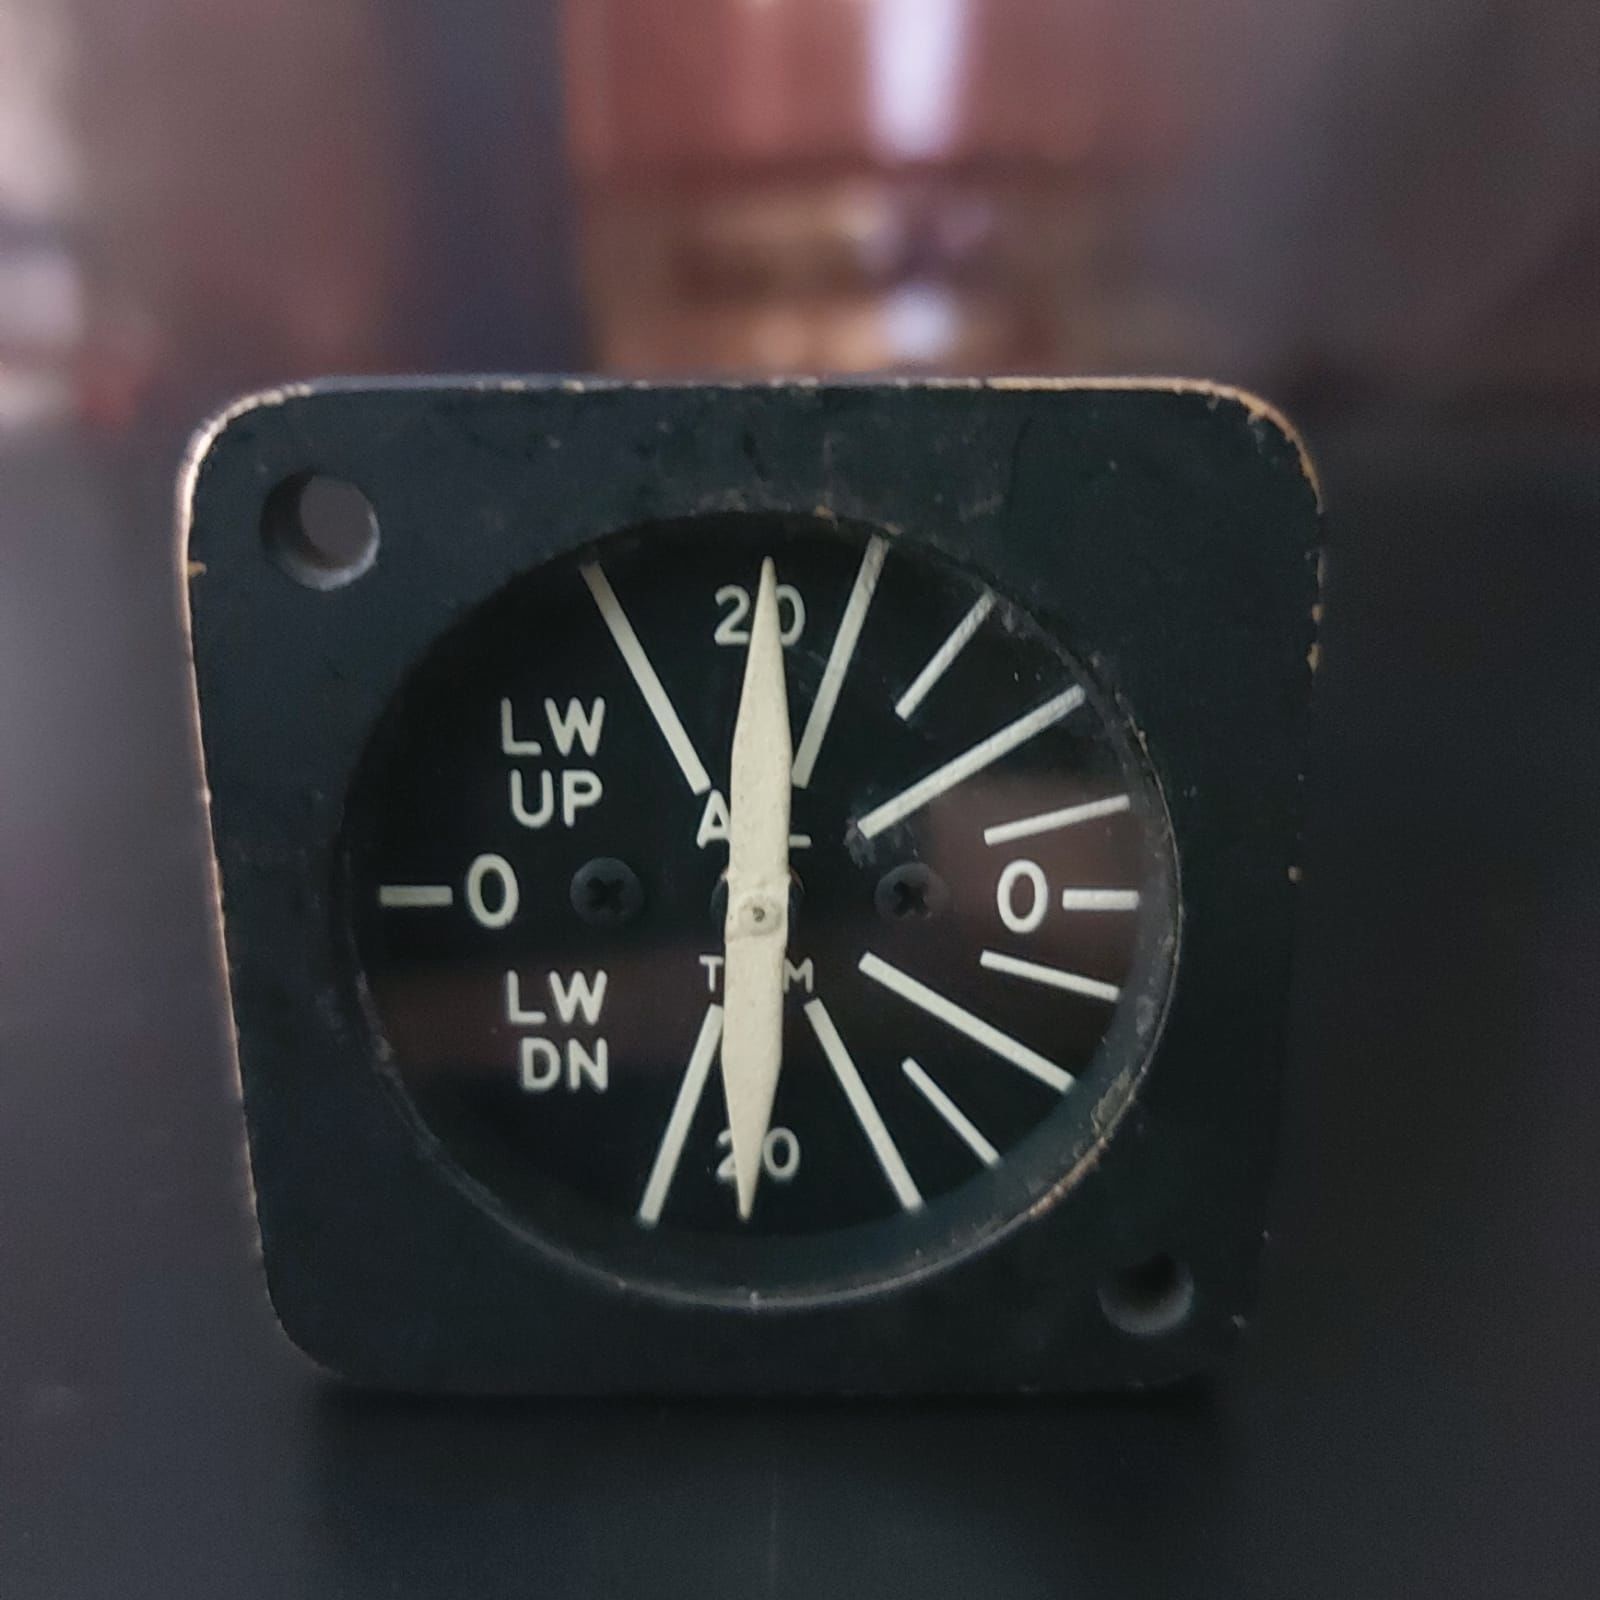 4.5x4.5x6 cm. OH-13 Helicopter Indicator-14